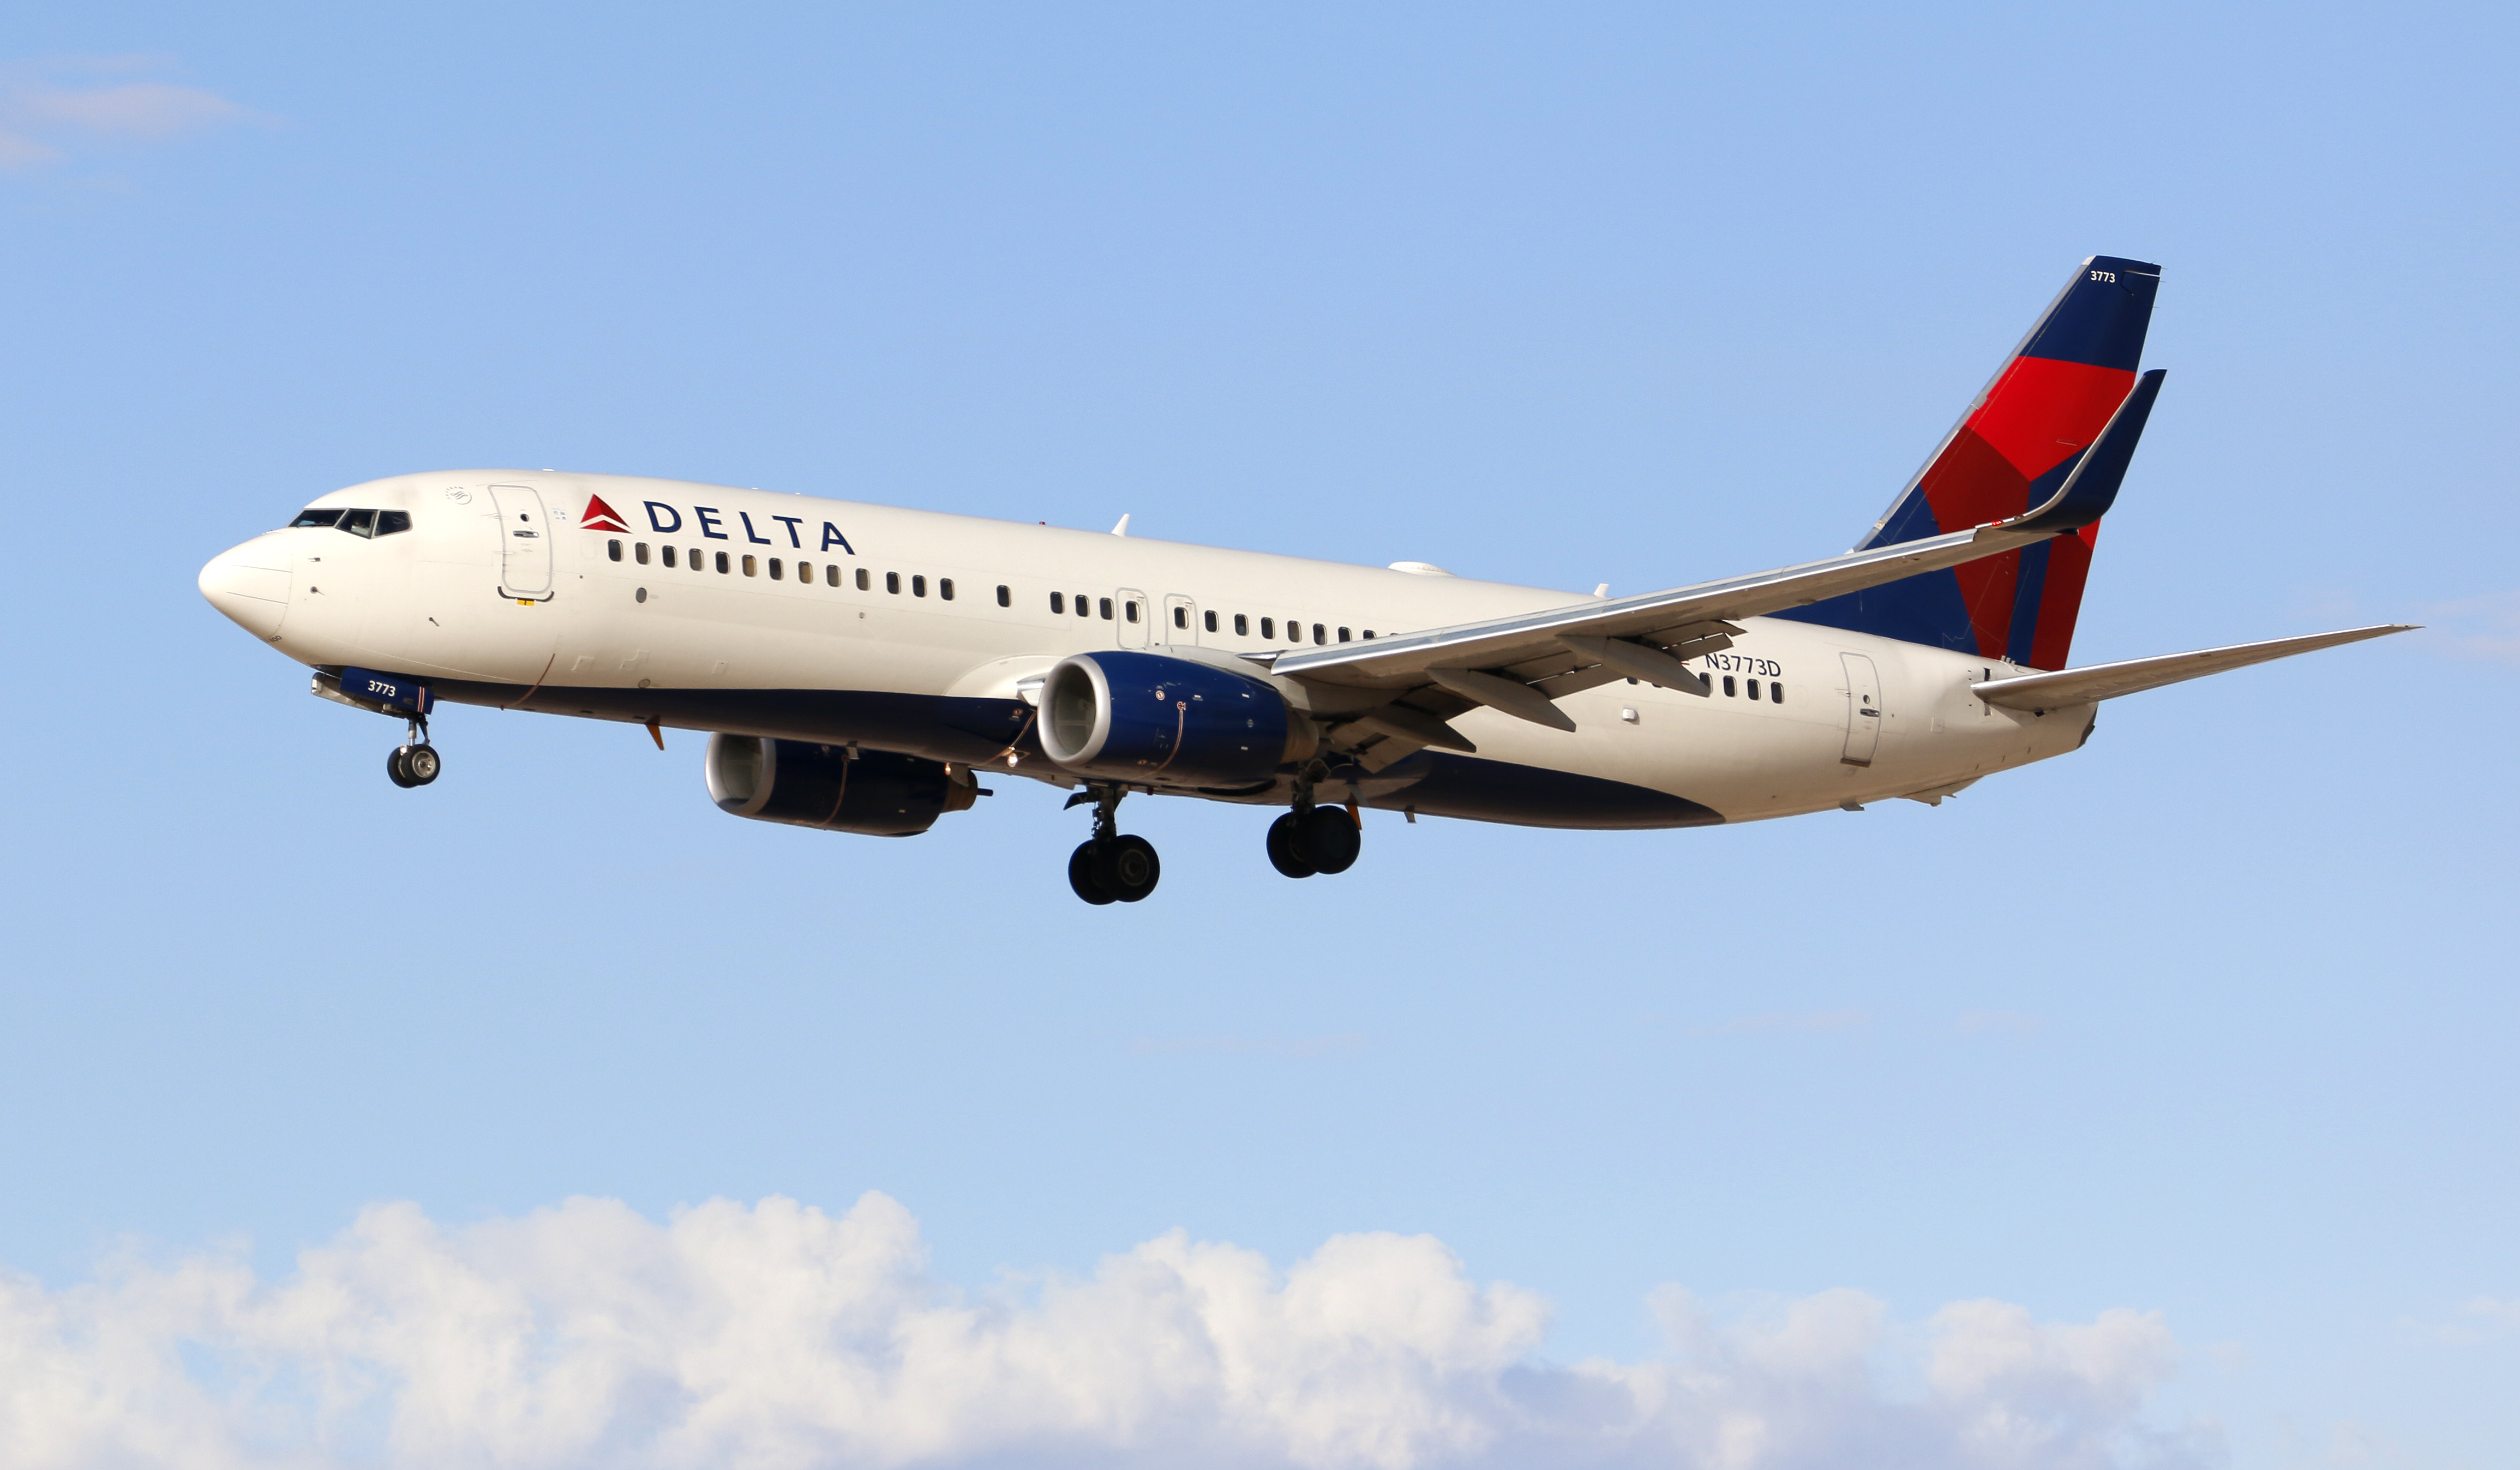 A Delta Air Lines Boeing 737 lands in Las Vegas on March 3, 2015.